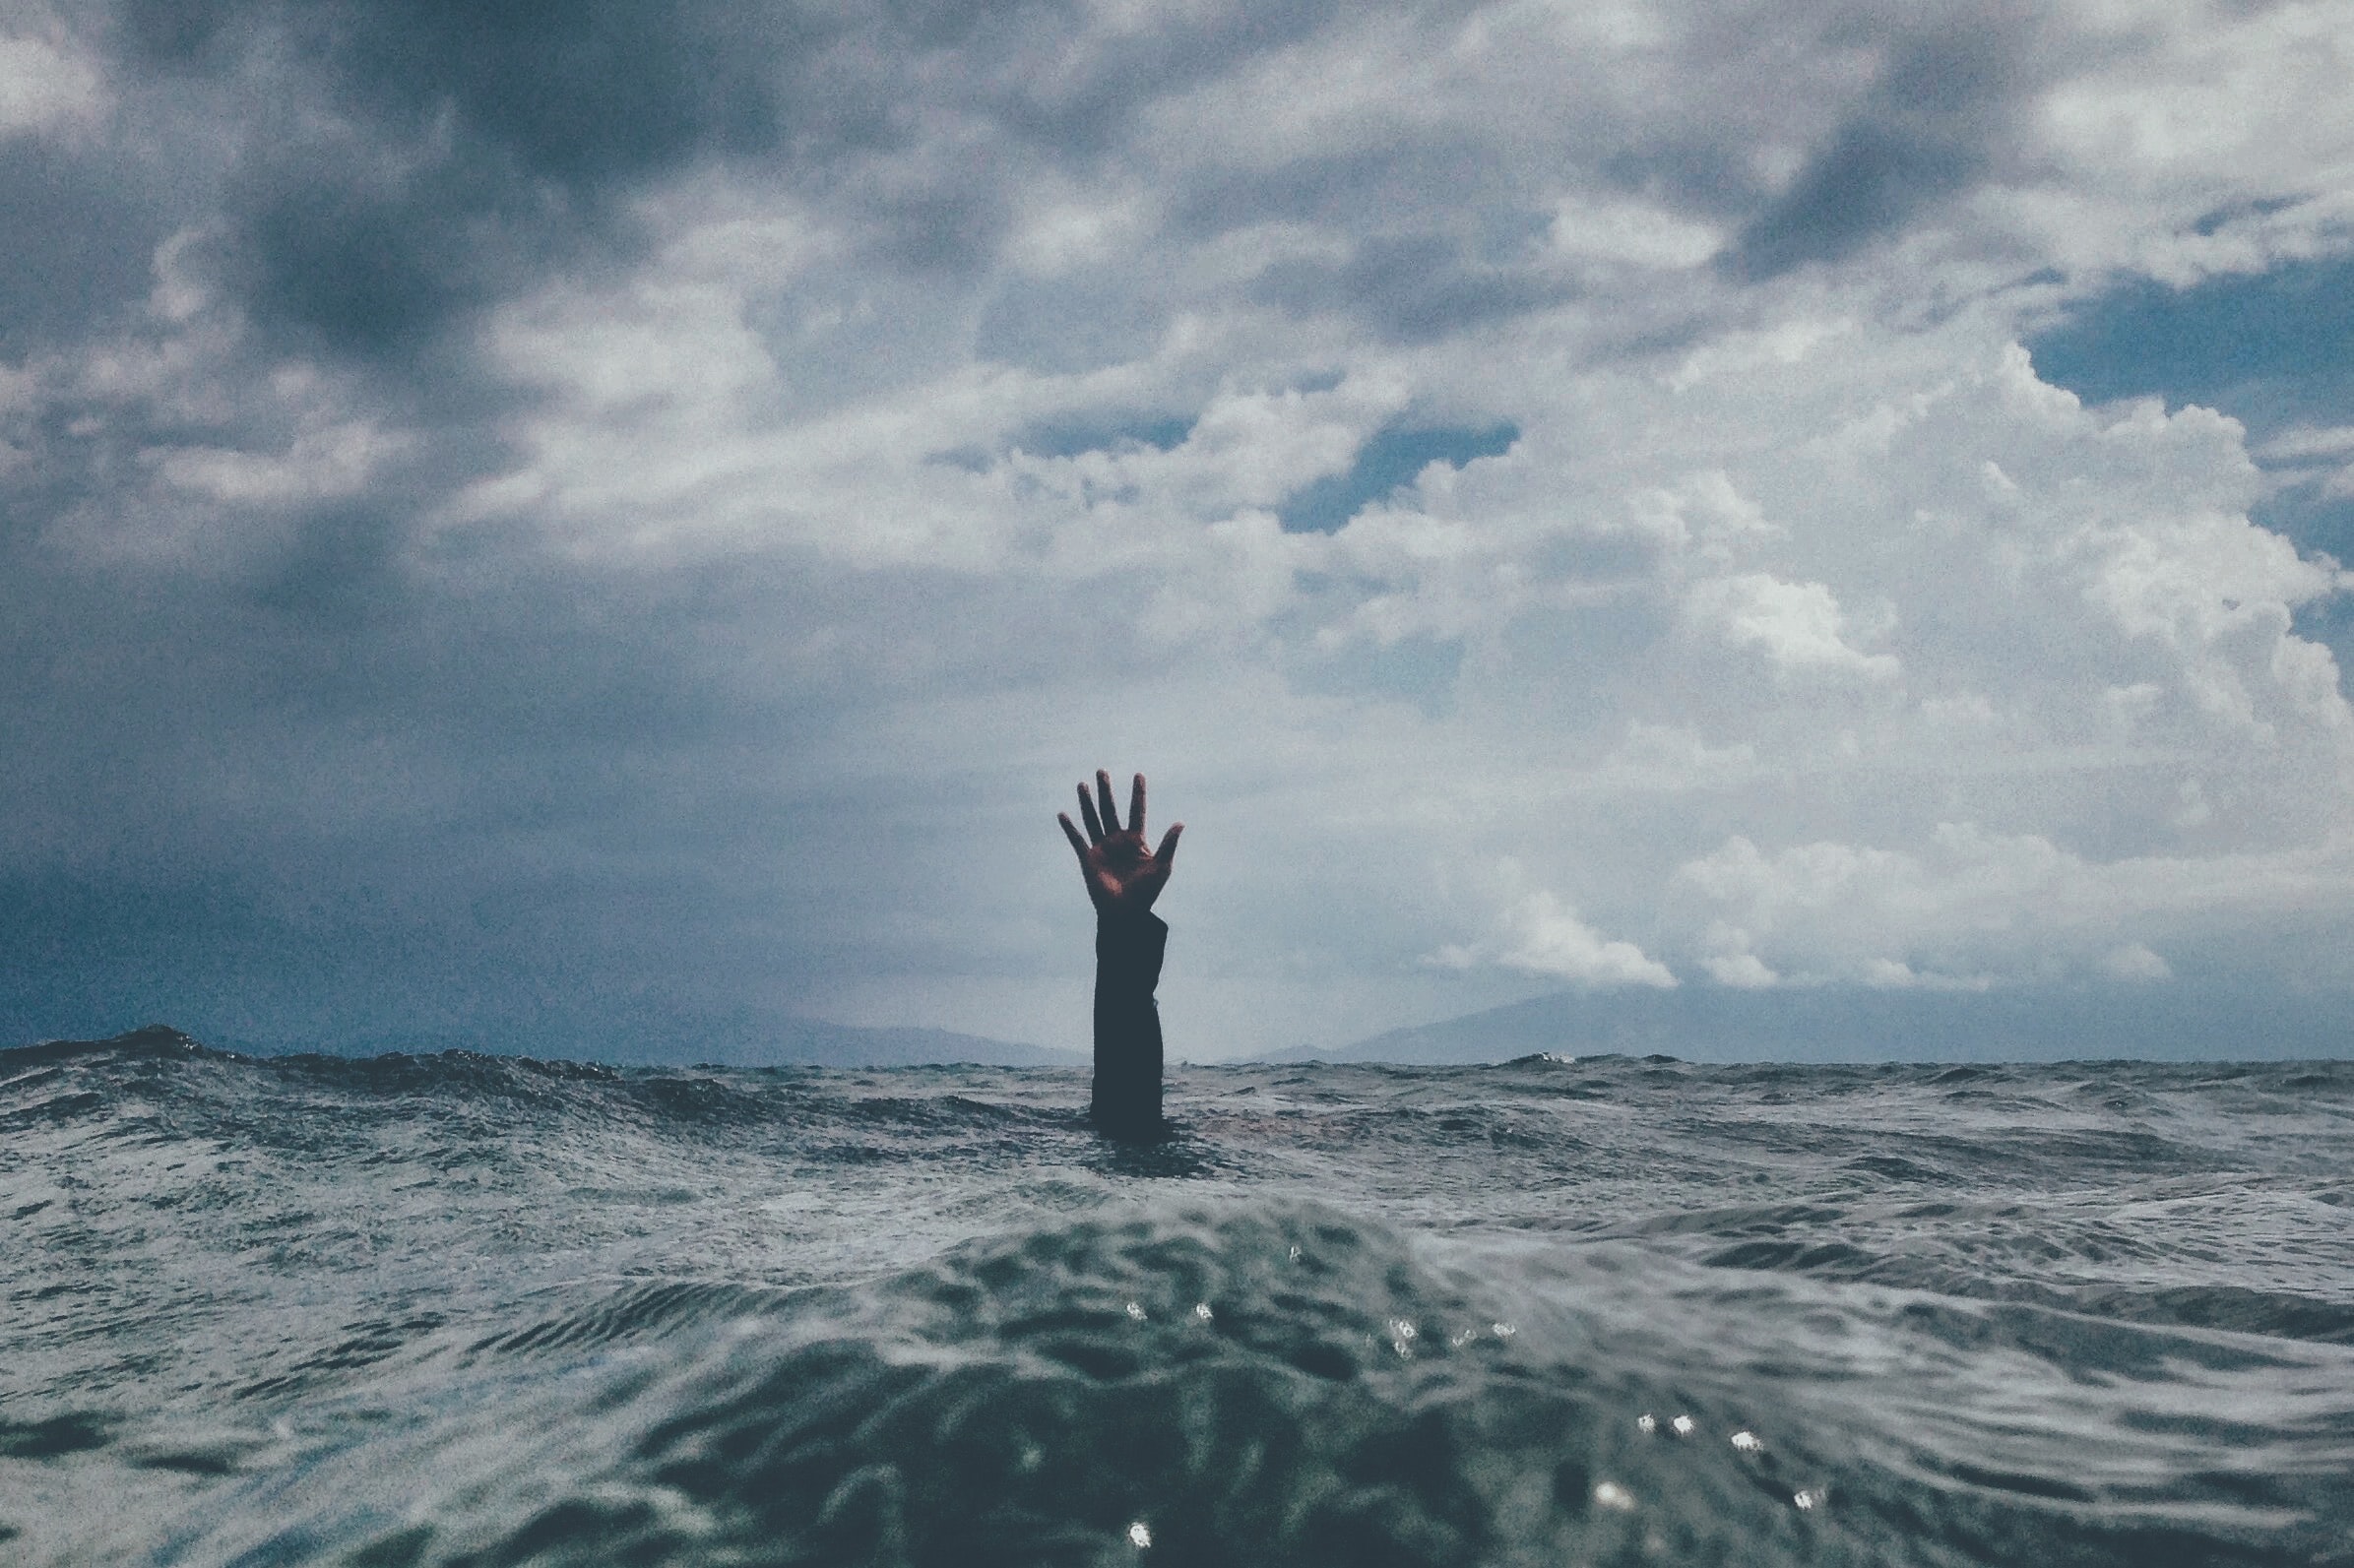 When a drowning accident happens